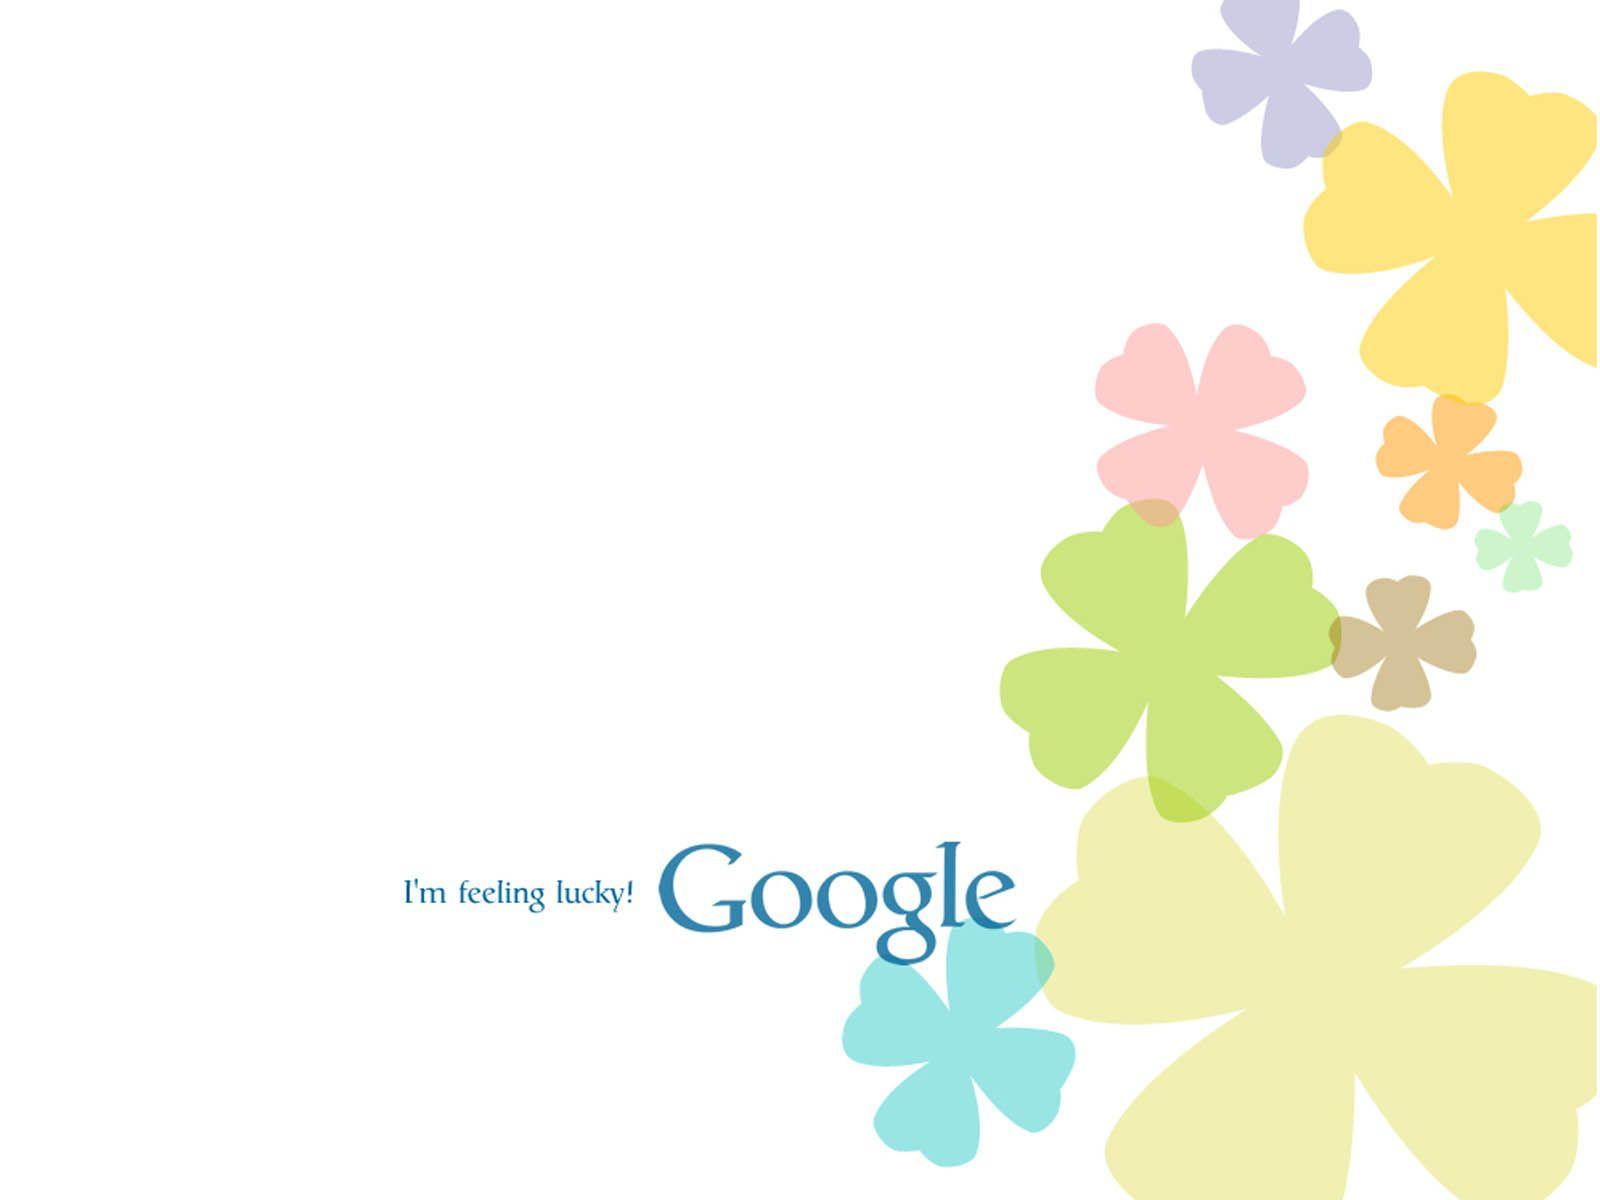 Free Google Background Wallpaper. Download Wide and HDHigh